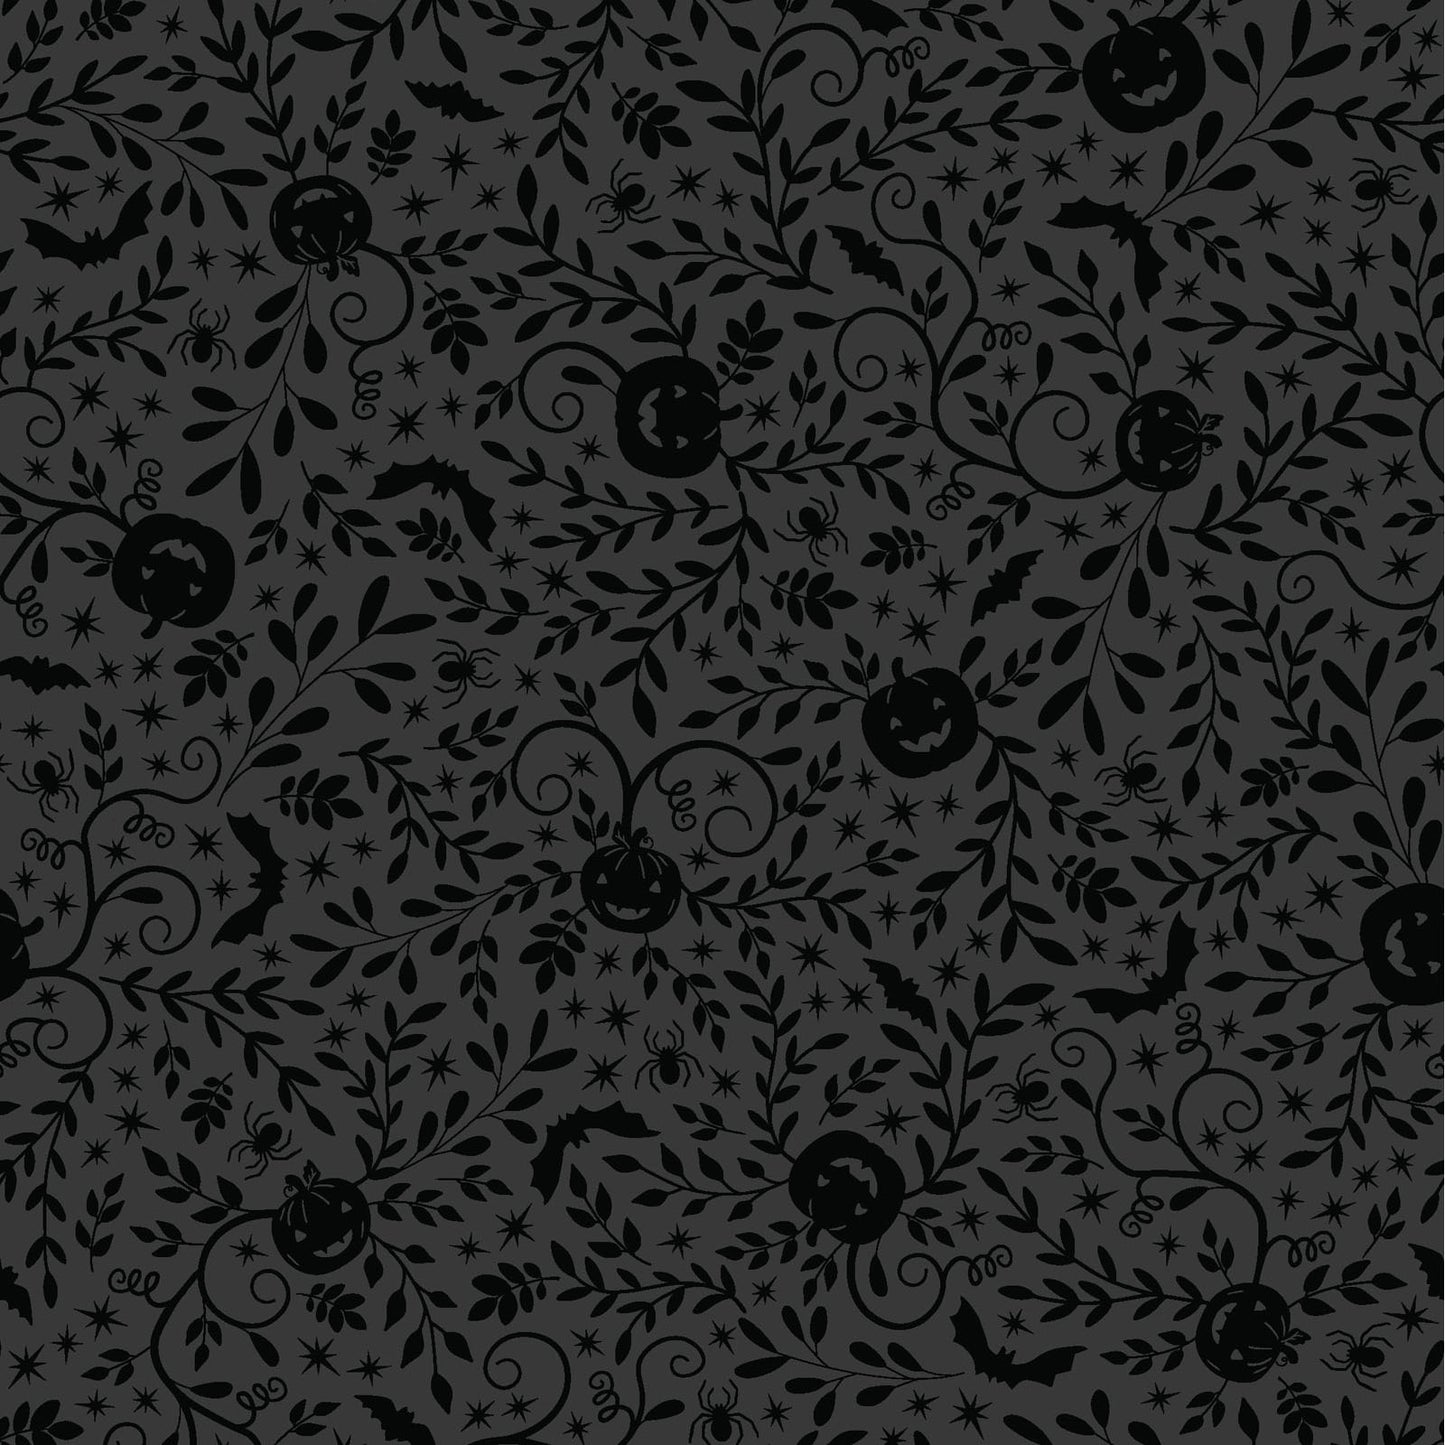 The Pumpkin Vines in black (MAS10572-J) print from the Pumpkin and Potions line by Kimberbell for Maywood Studio features tone on tone pumpkins, bats, and more. Photo shows details of the designs.